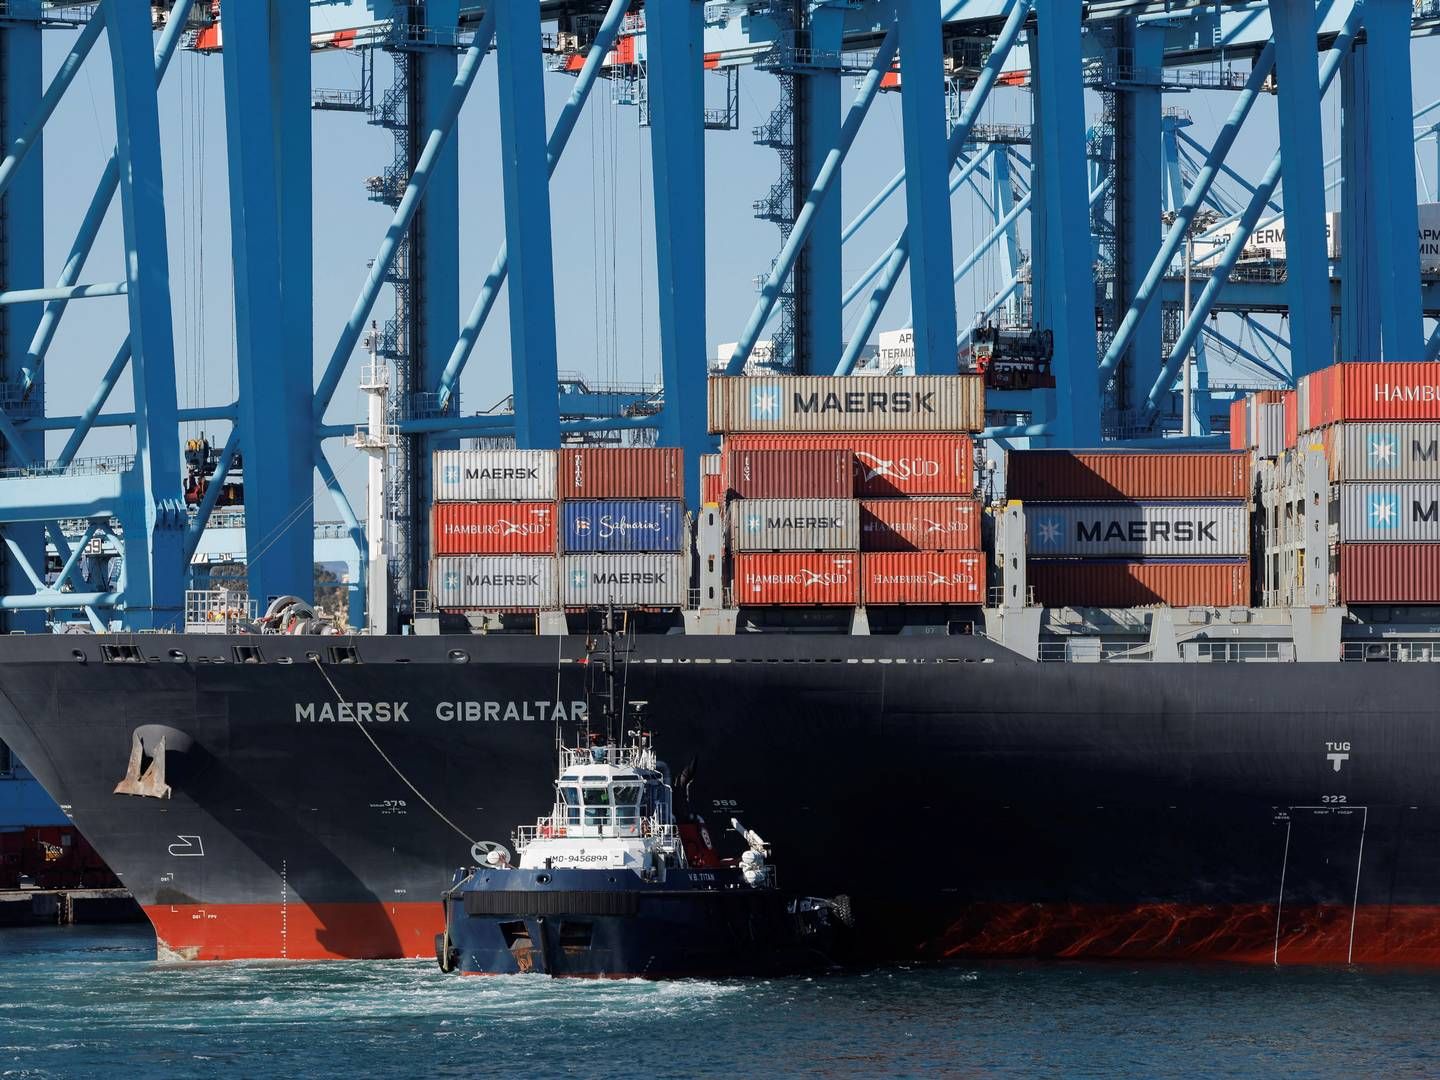 The container ship Maersk Gibraltar, which on Thursday suffered a failed missile attack from the Houthi militant rebel movement in Yemen.